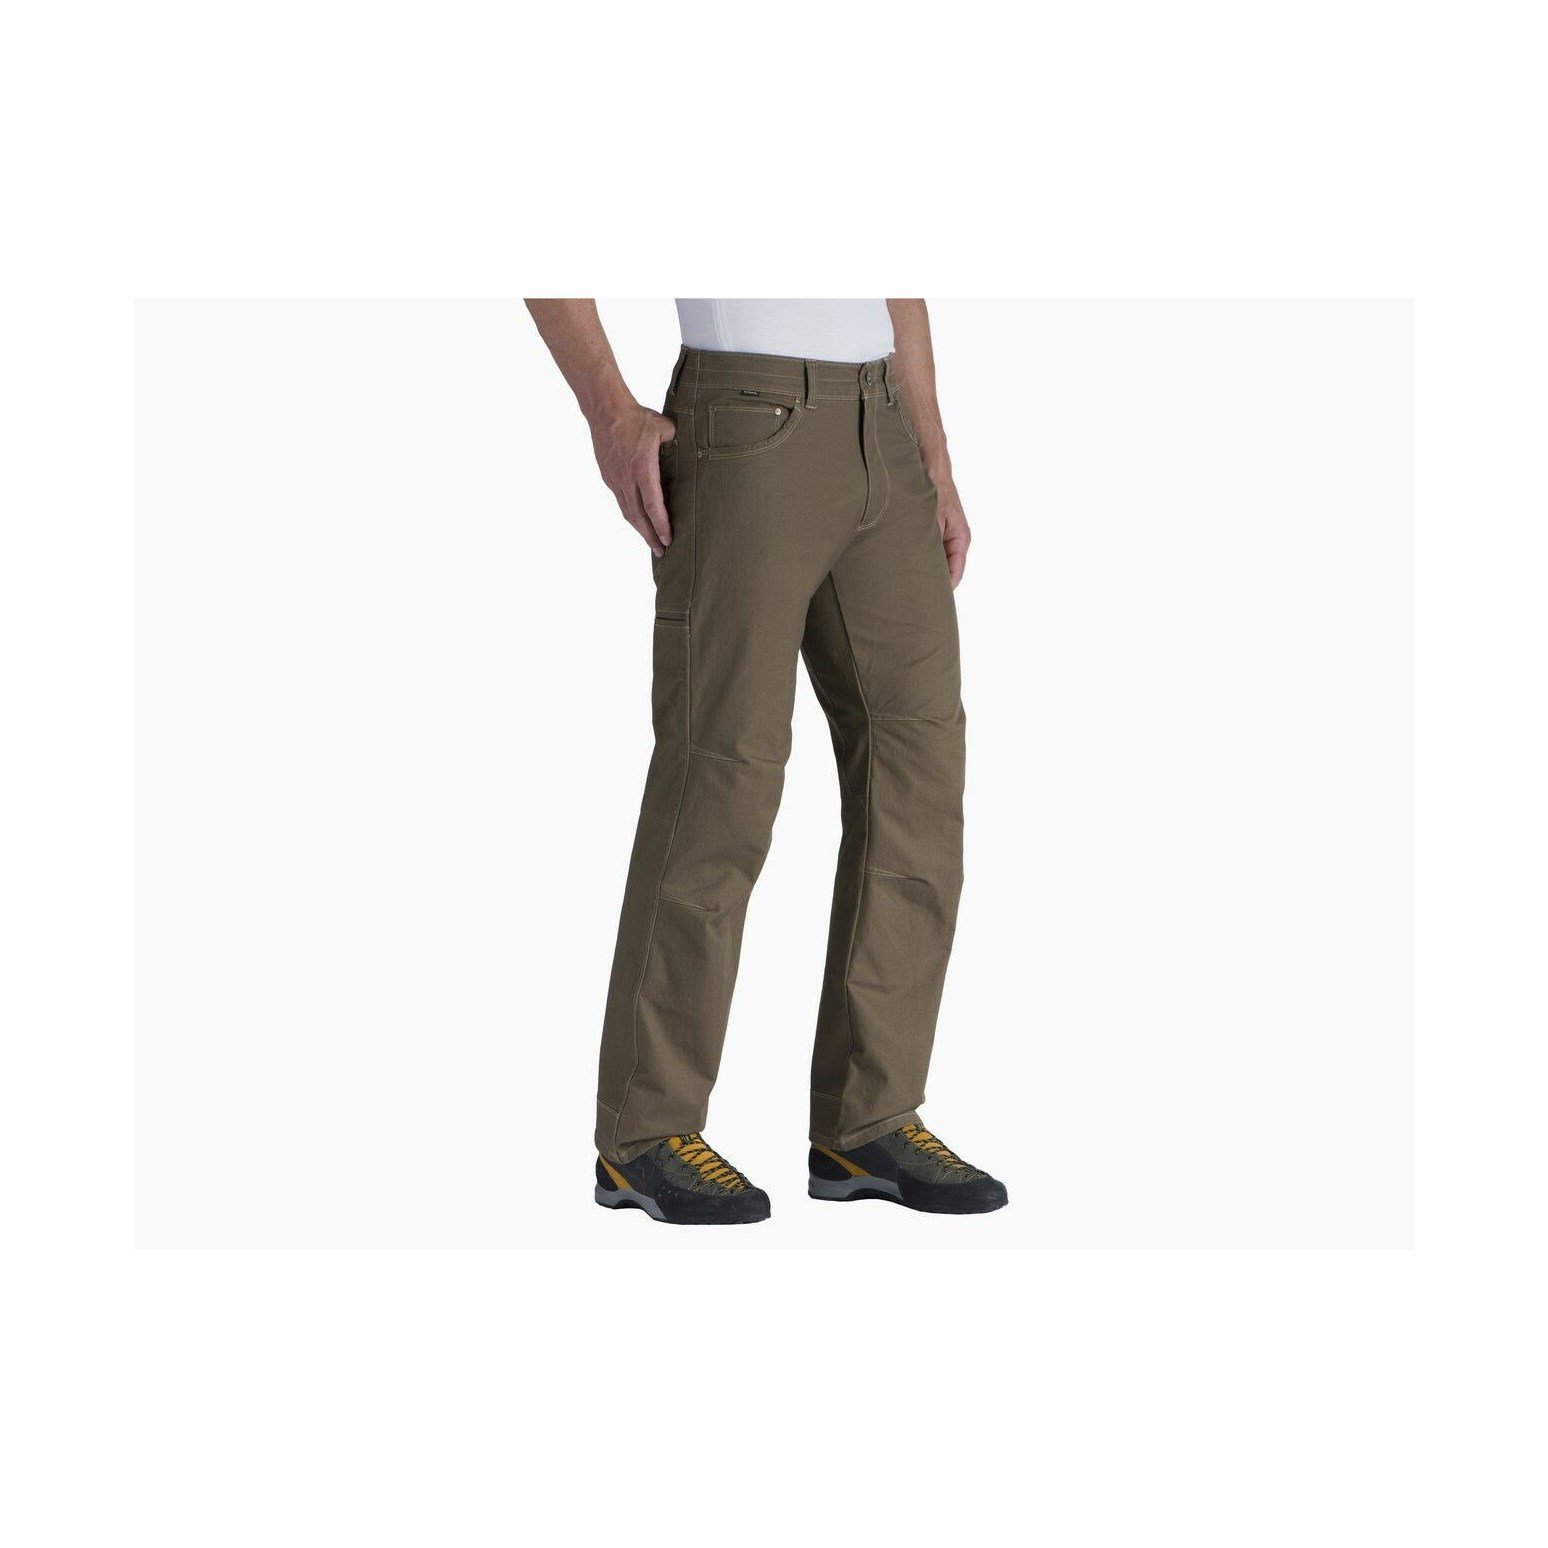 Rydr™ Full Fit - Pants, Kuhl